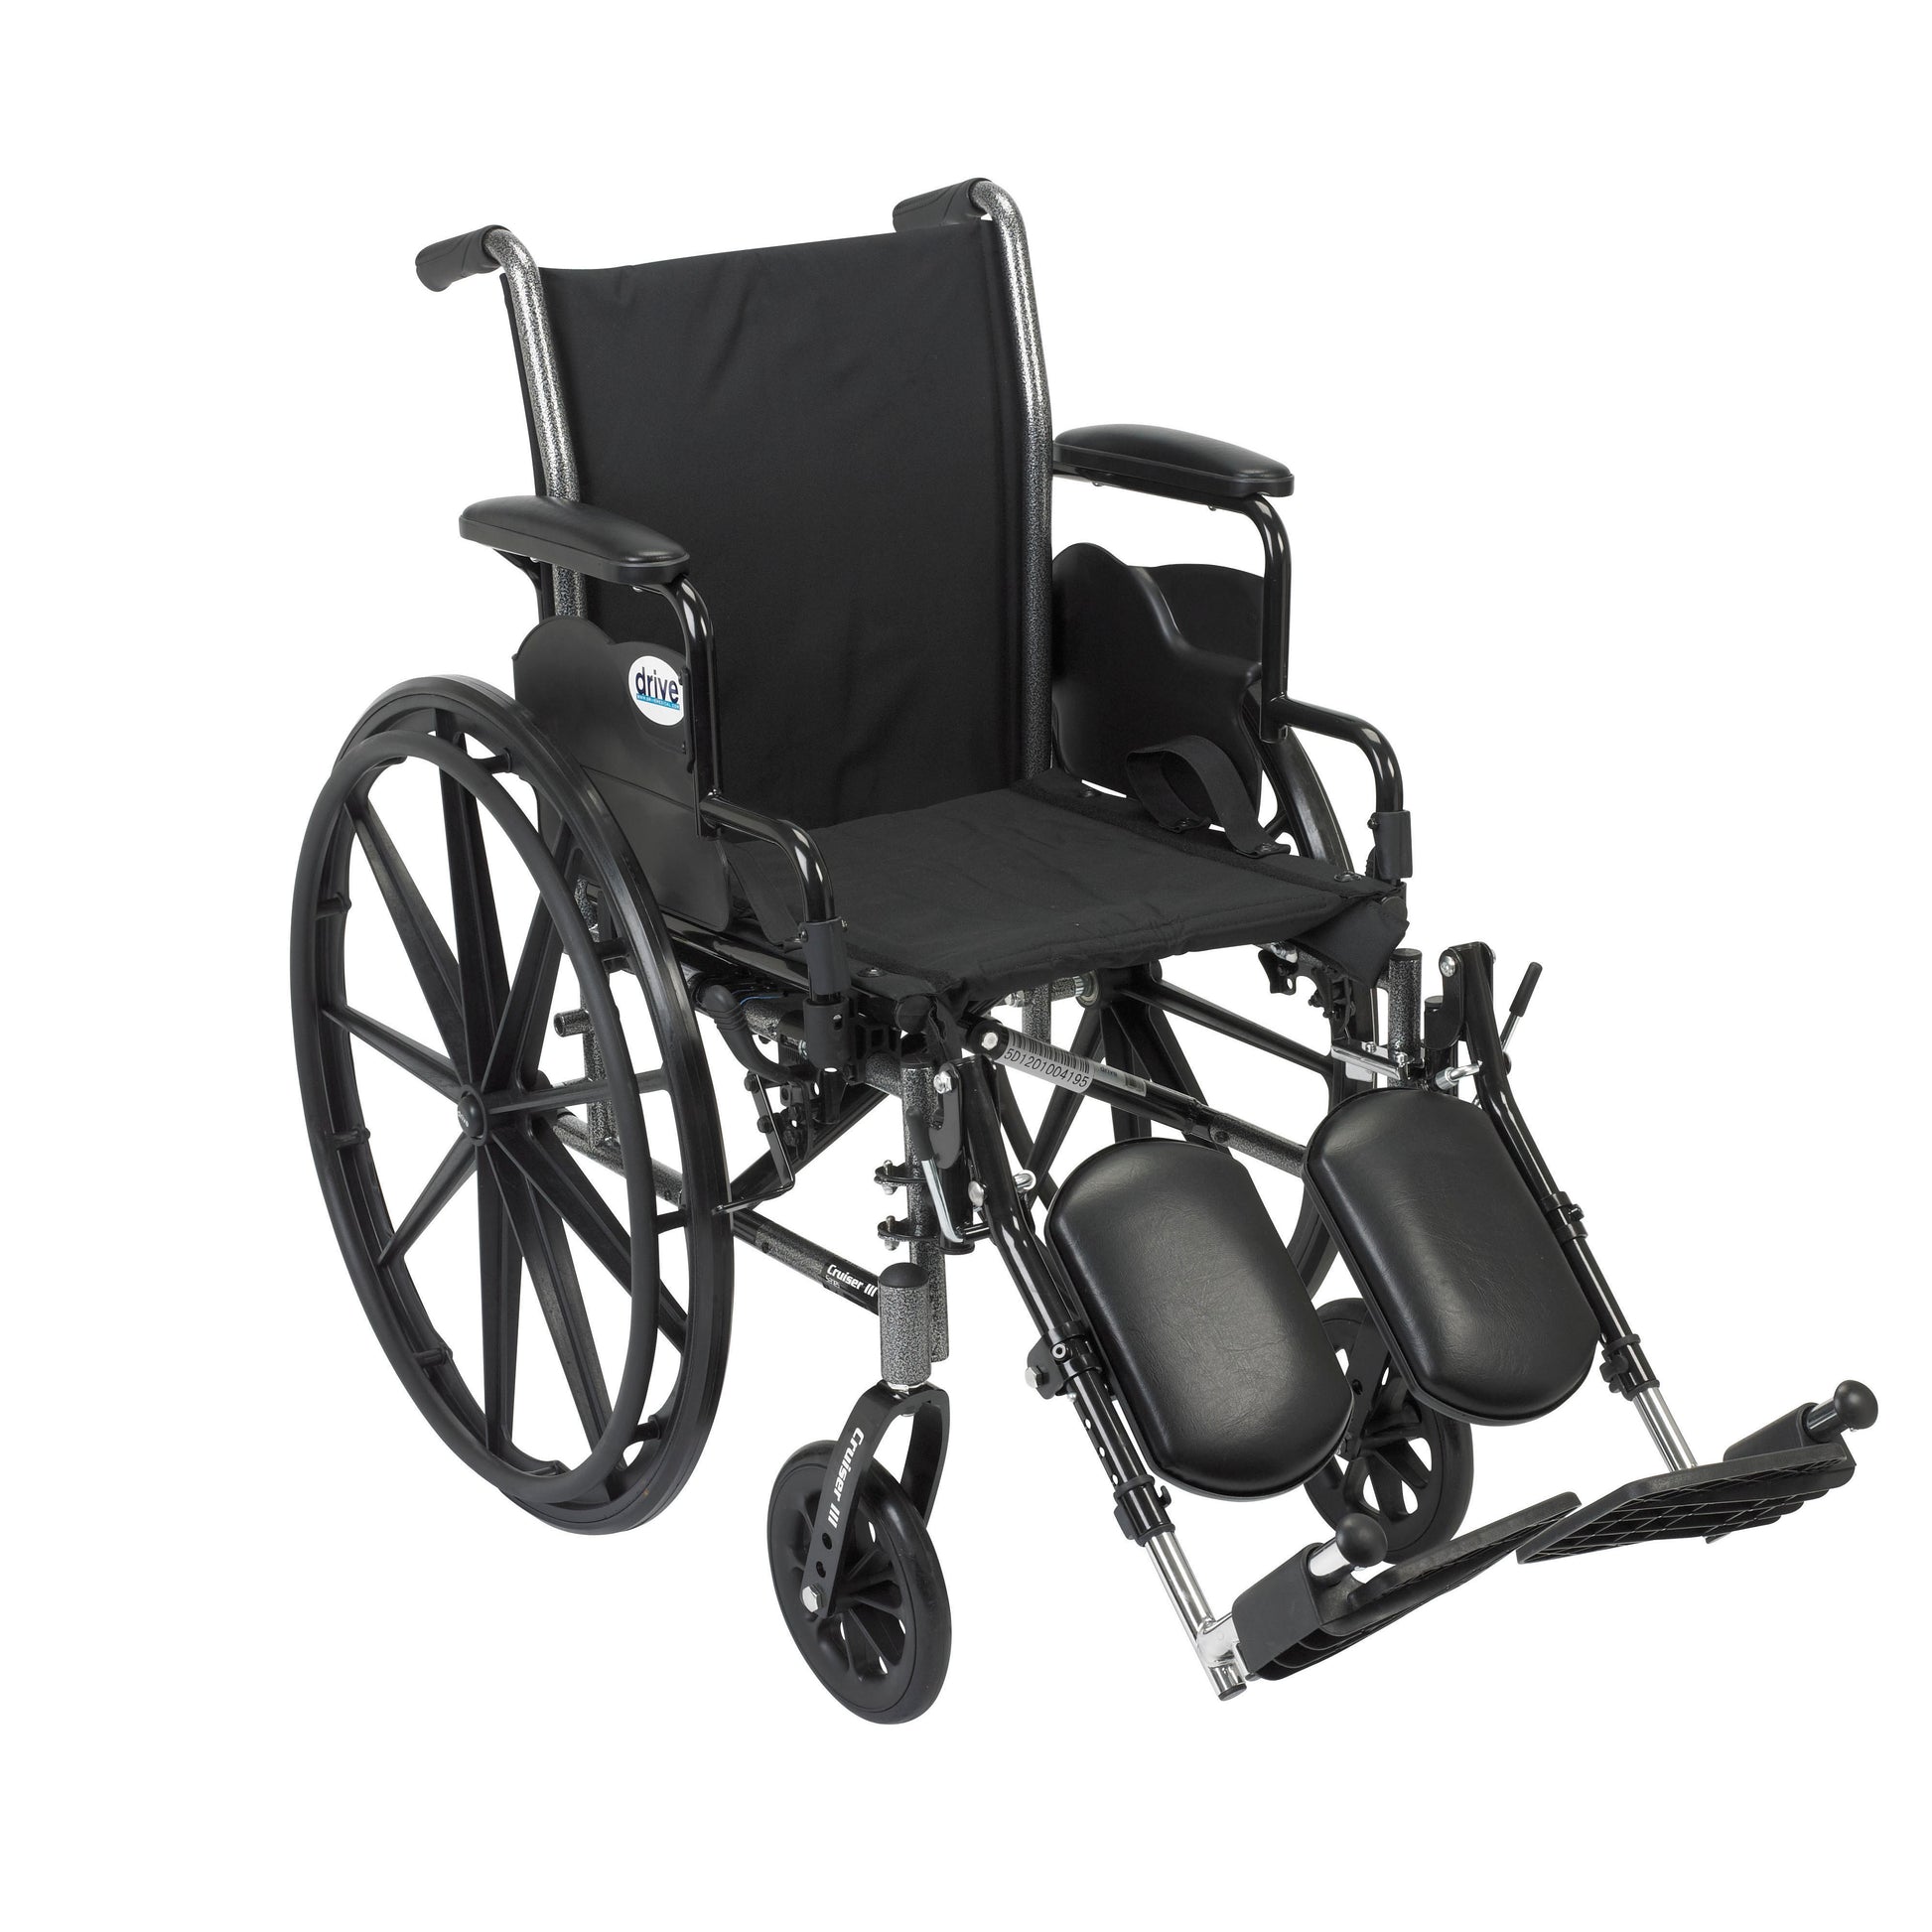 Cruiser III Light Weight Wheelchair with Flip Back Removable Arms, Desk Arms, Elevating Leg Rests, 16" Seat